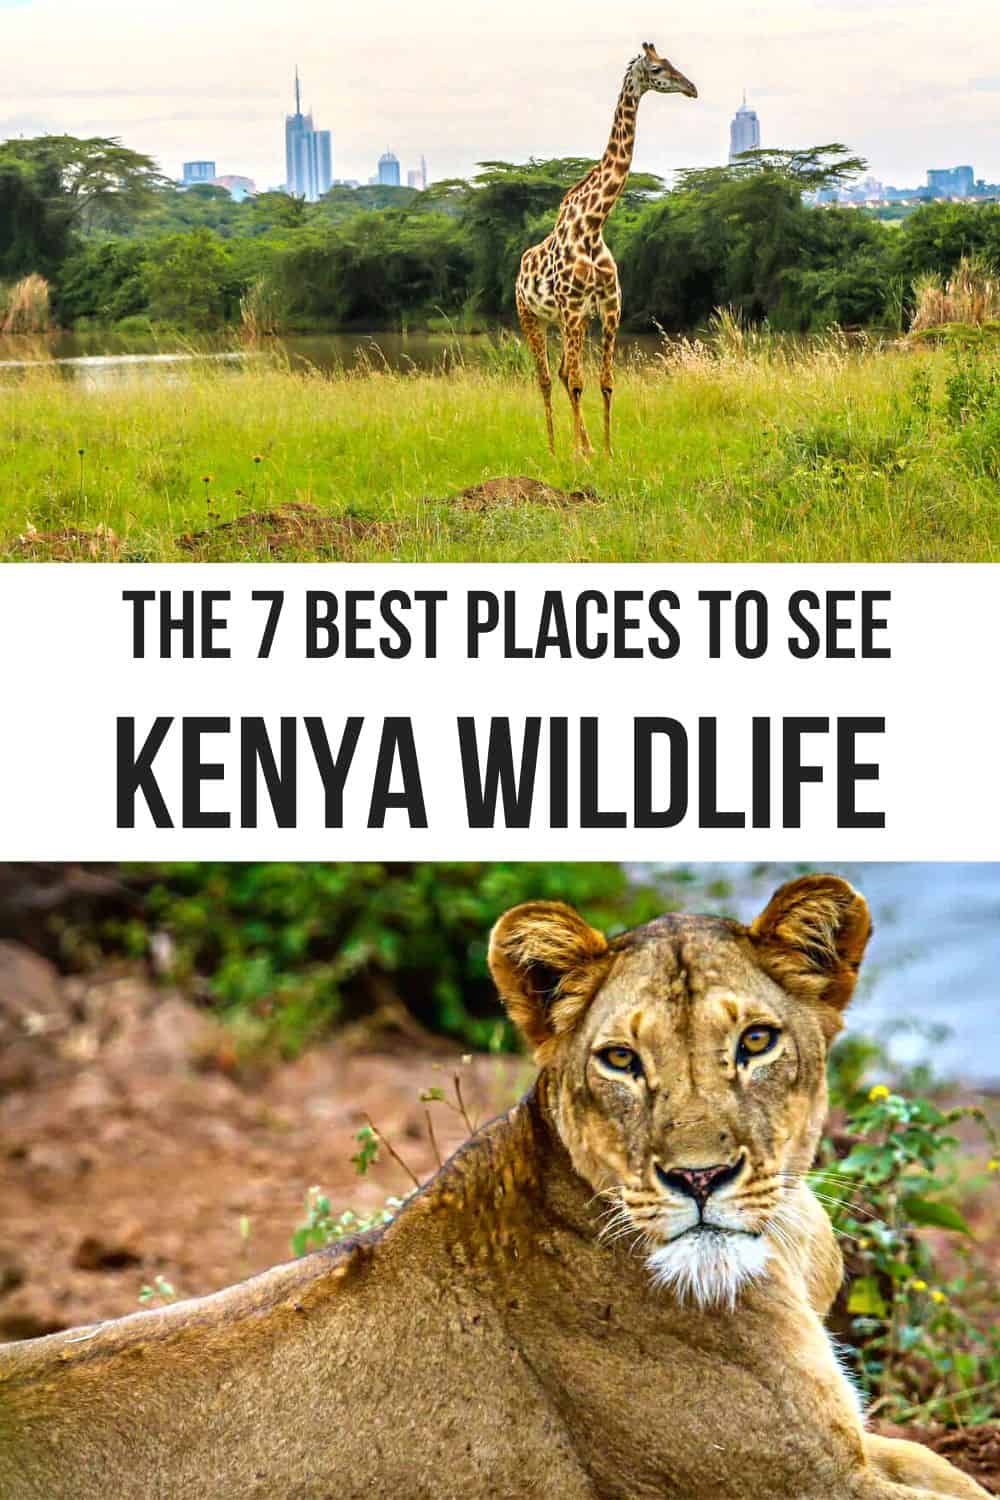 The 7 Best Safari Parks and Game Reserves in Kenya from Amboseli and the Maasai Mara to Ol Pejeto and Tsavo. | kenya national parks | game reserves in kenya | parks in kenya | national reserve in kenya | kenya safari parks | safari parks in kenya | kenya national reserves | kenya parks | national park in kenya | national reserves in kenya | game parks in kenya | kenya game parks | national parks of kenya